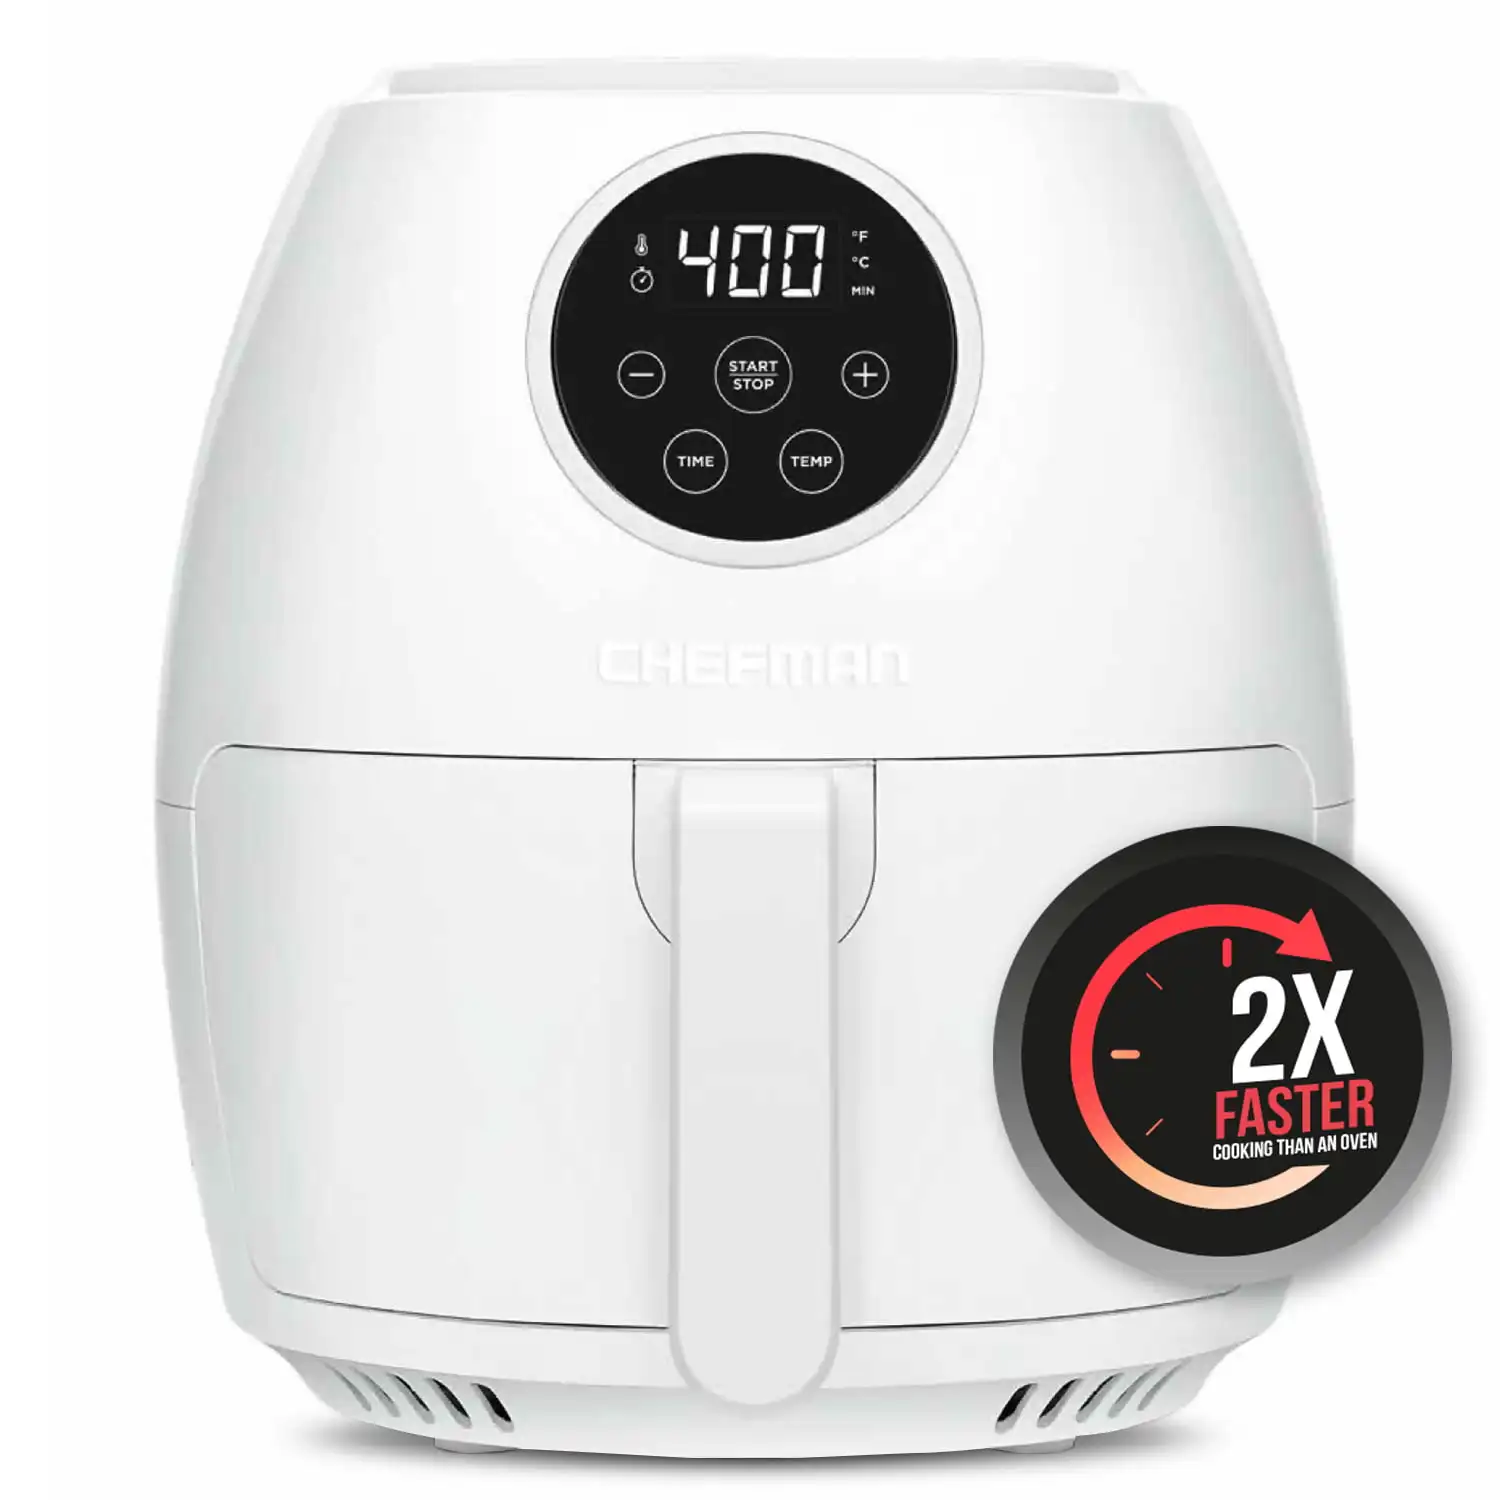 Turbo Fry Digital Touch Air Fryer Oven, Glossy White, 3.7 Qt